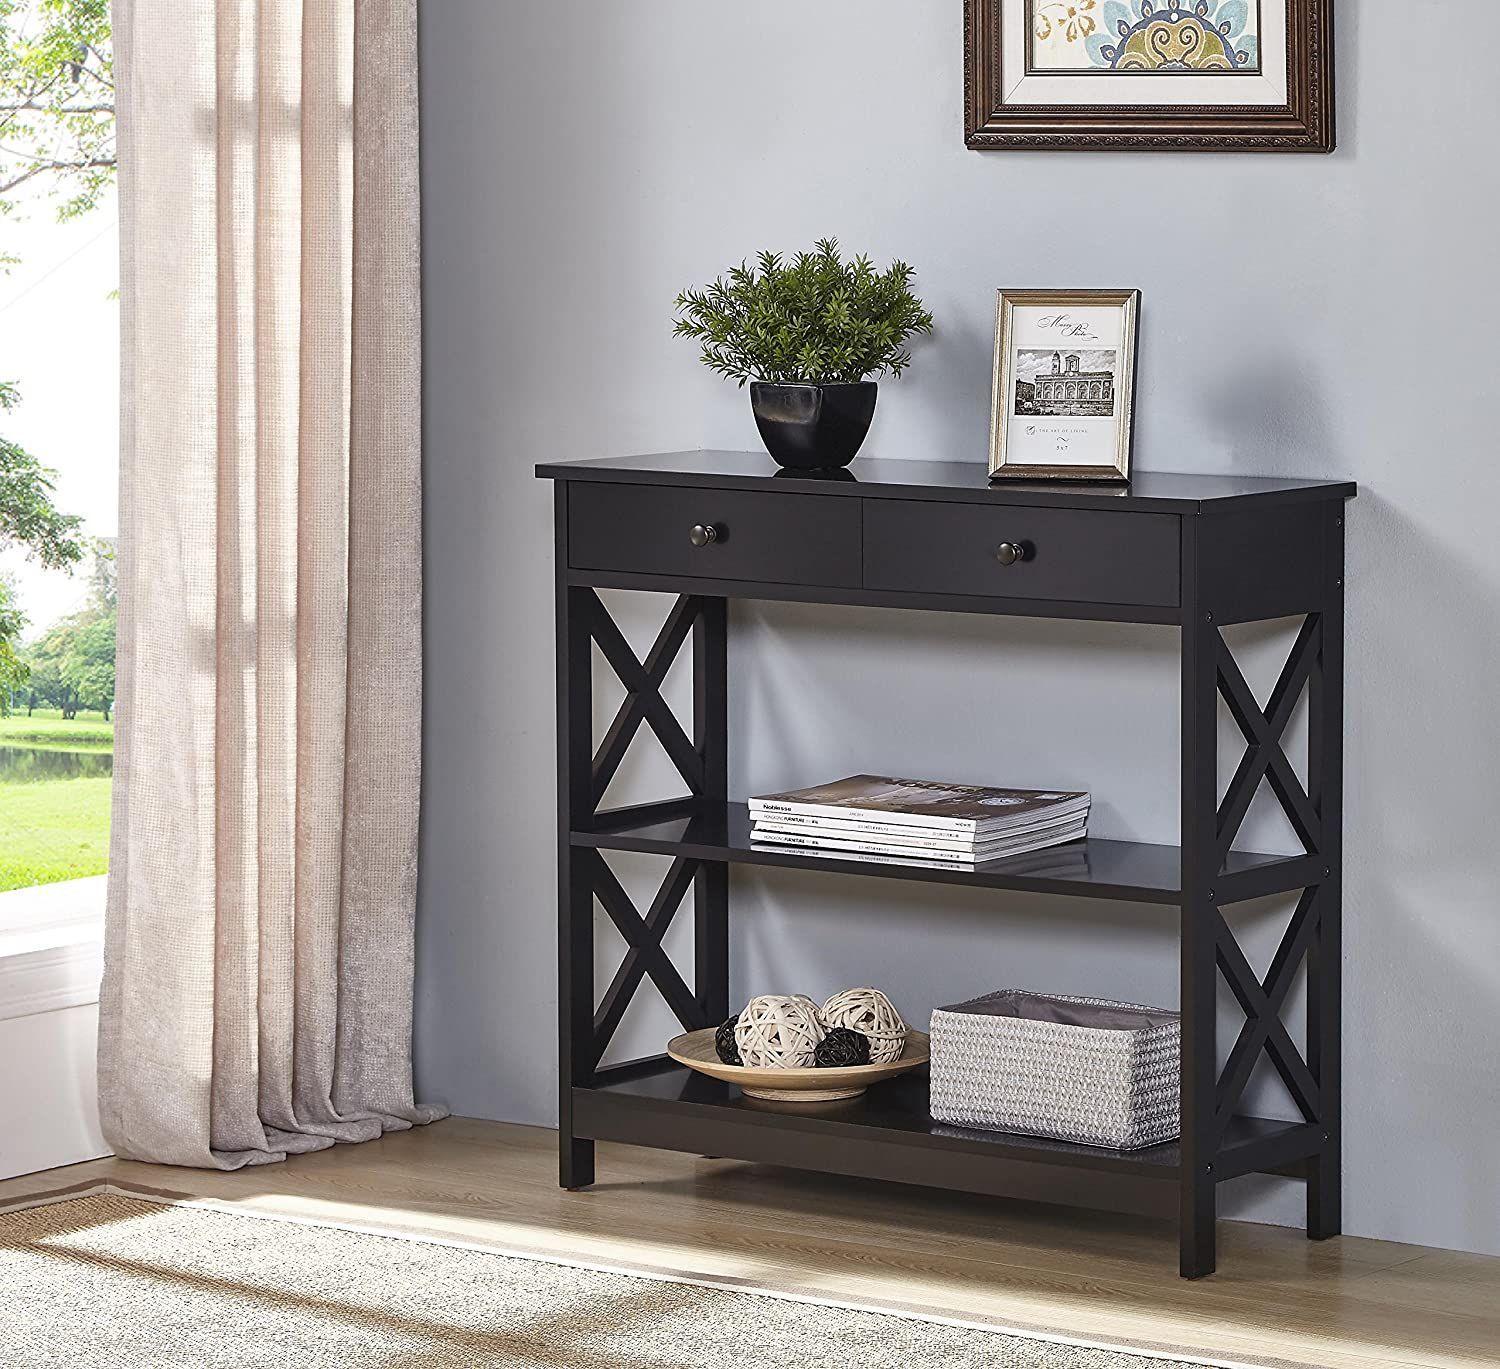 Black Finish 3 Tier Console Sofa Entry Table With Shelf In 3 Tier Console Tables (View 2 of 20)